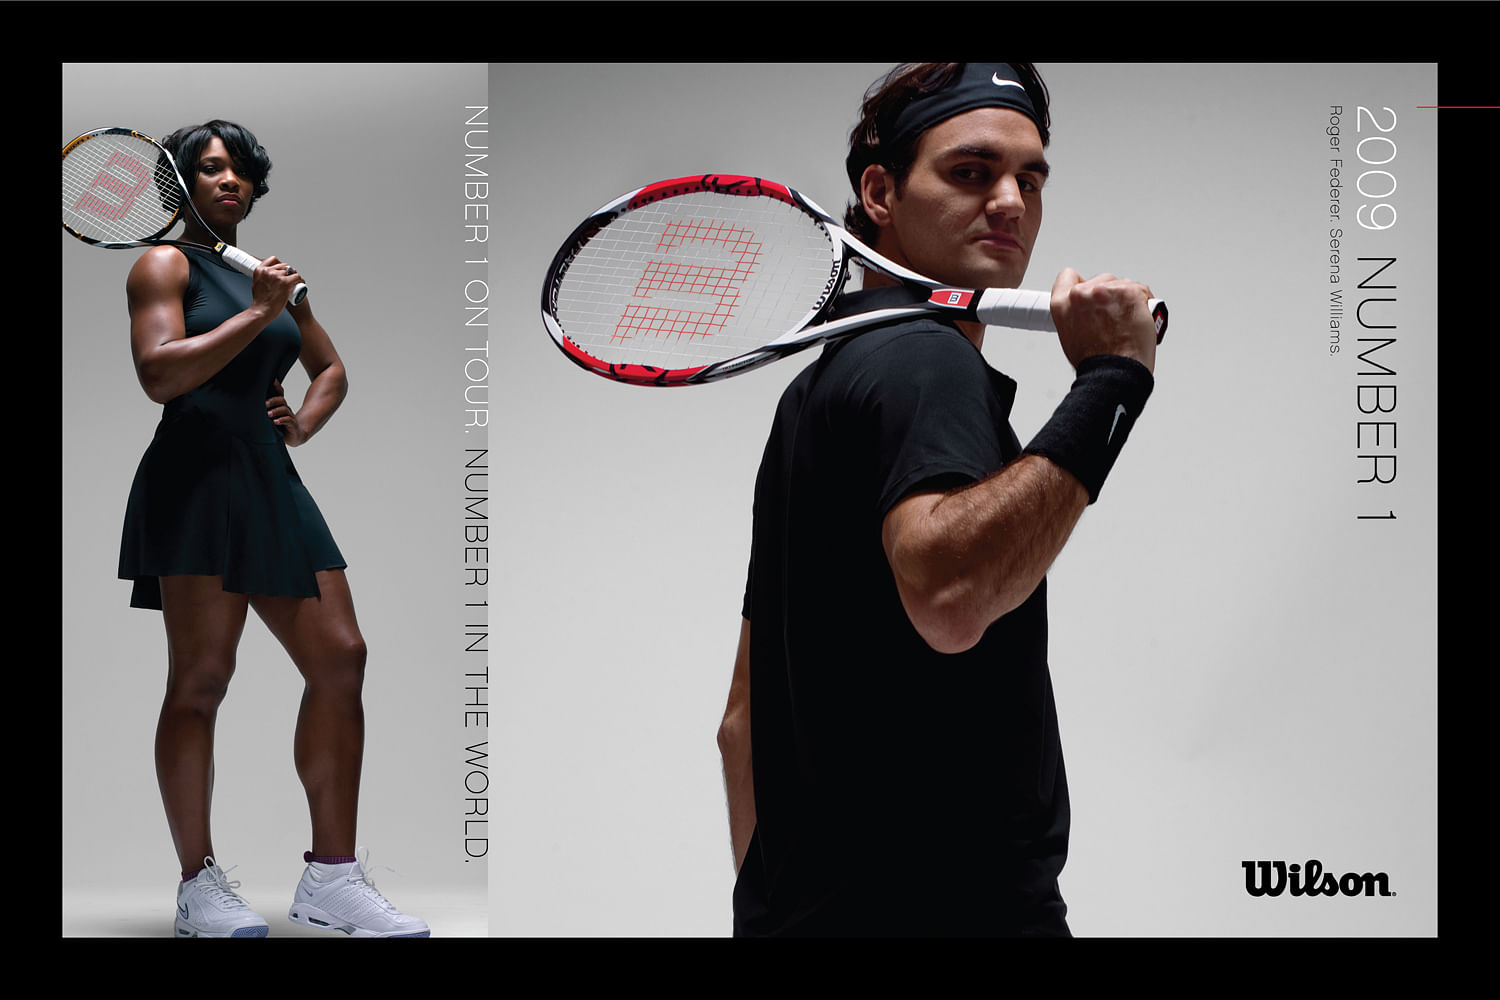 Roger Federer and Serena Williams: The tennis twins